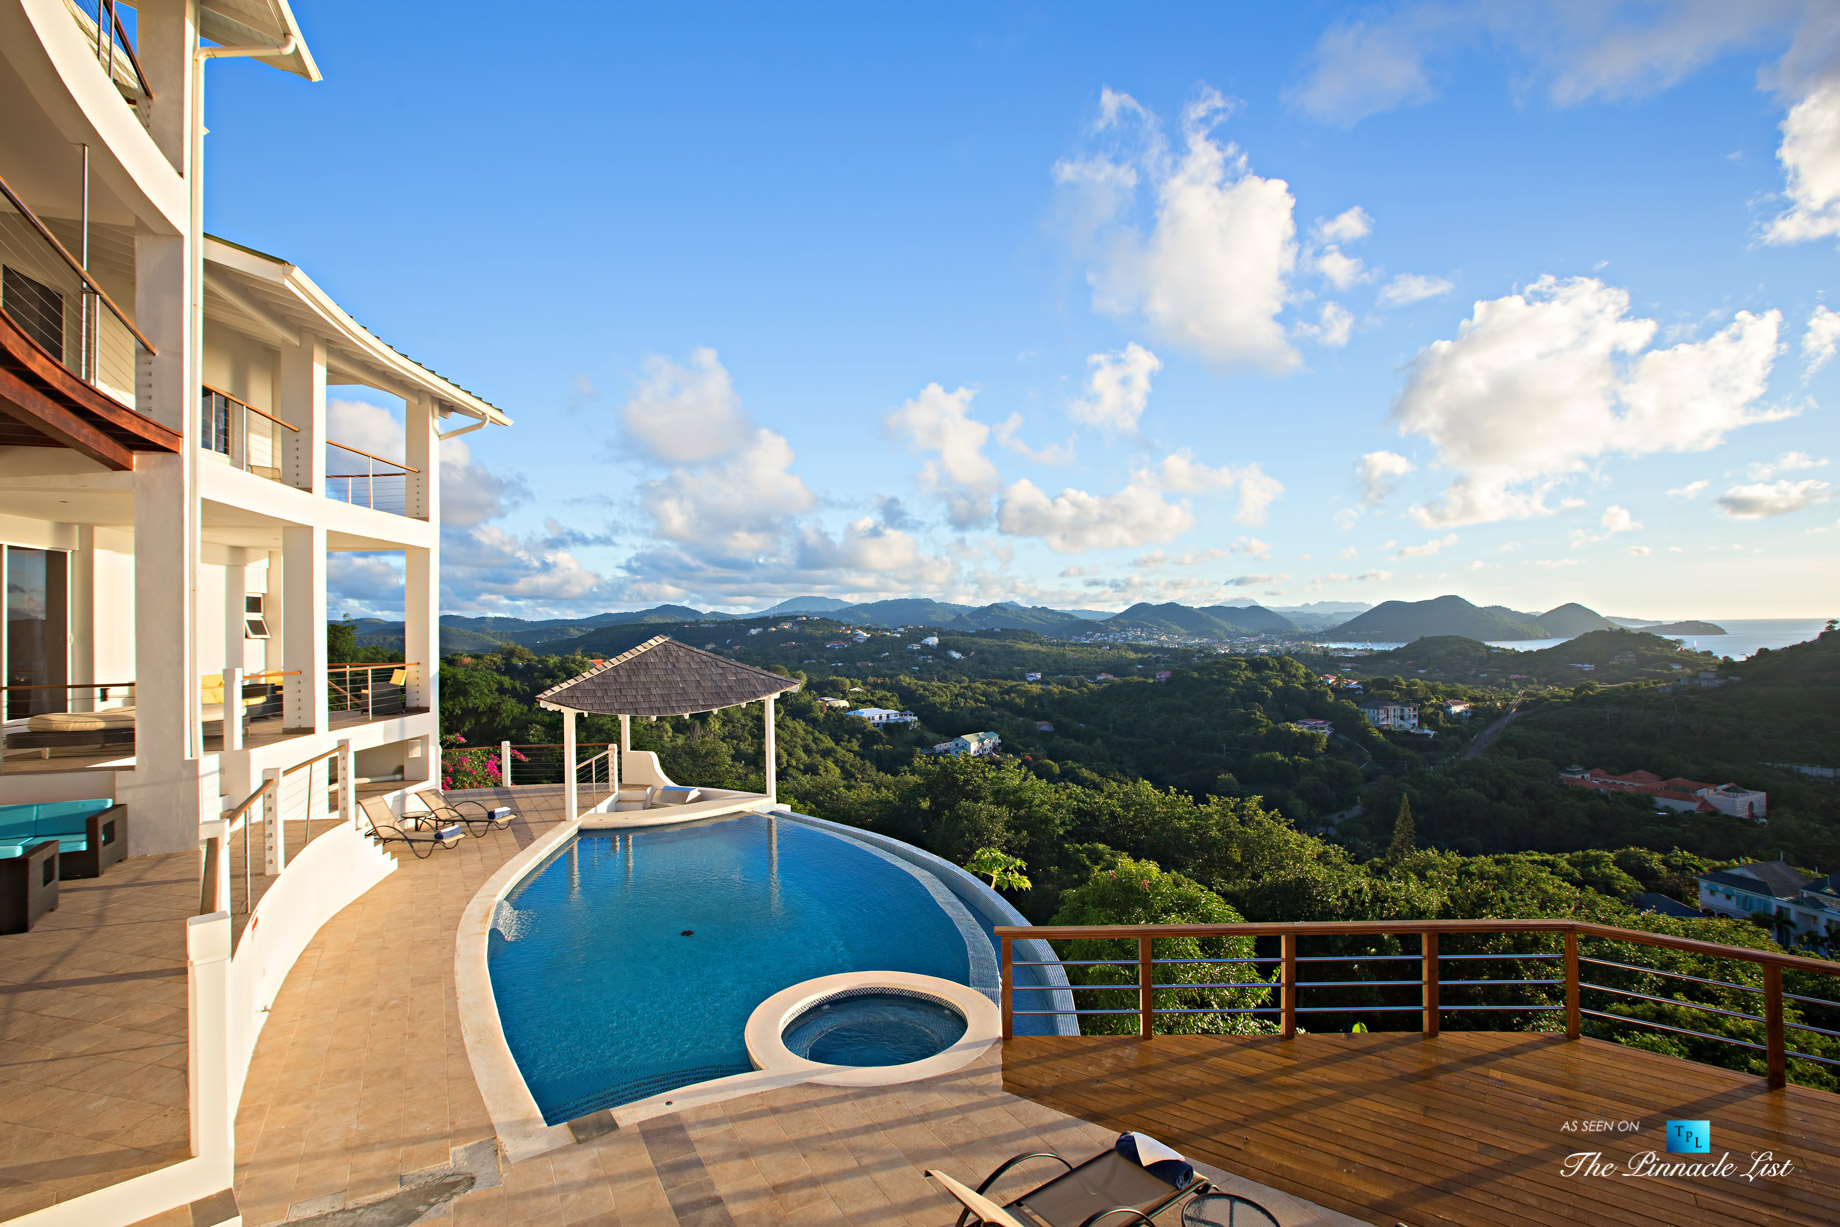 Akasha Luxury Caribbean Villa - Cap Estate, St. Lucia - Infinity Pool and Deck View - Luxury Real Estate - Premier Oceanview Home